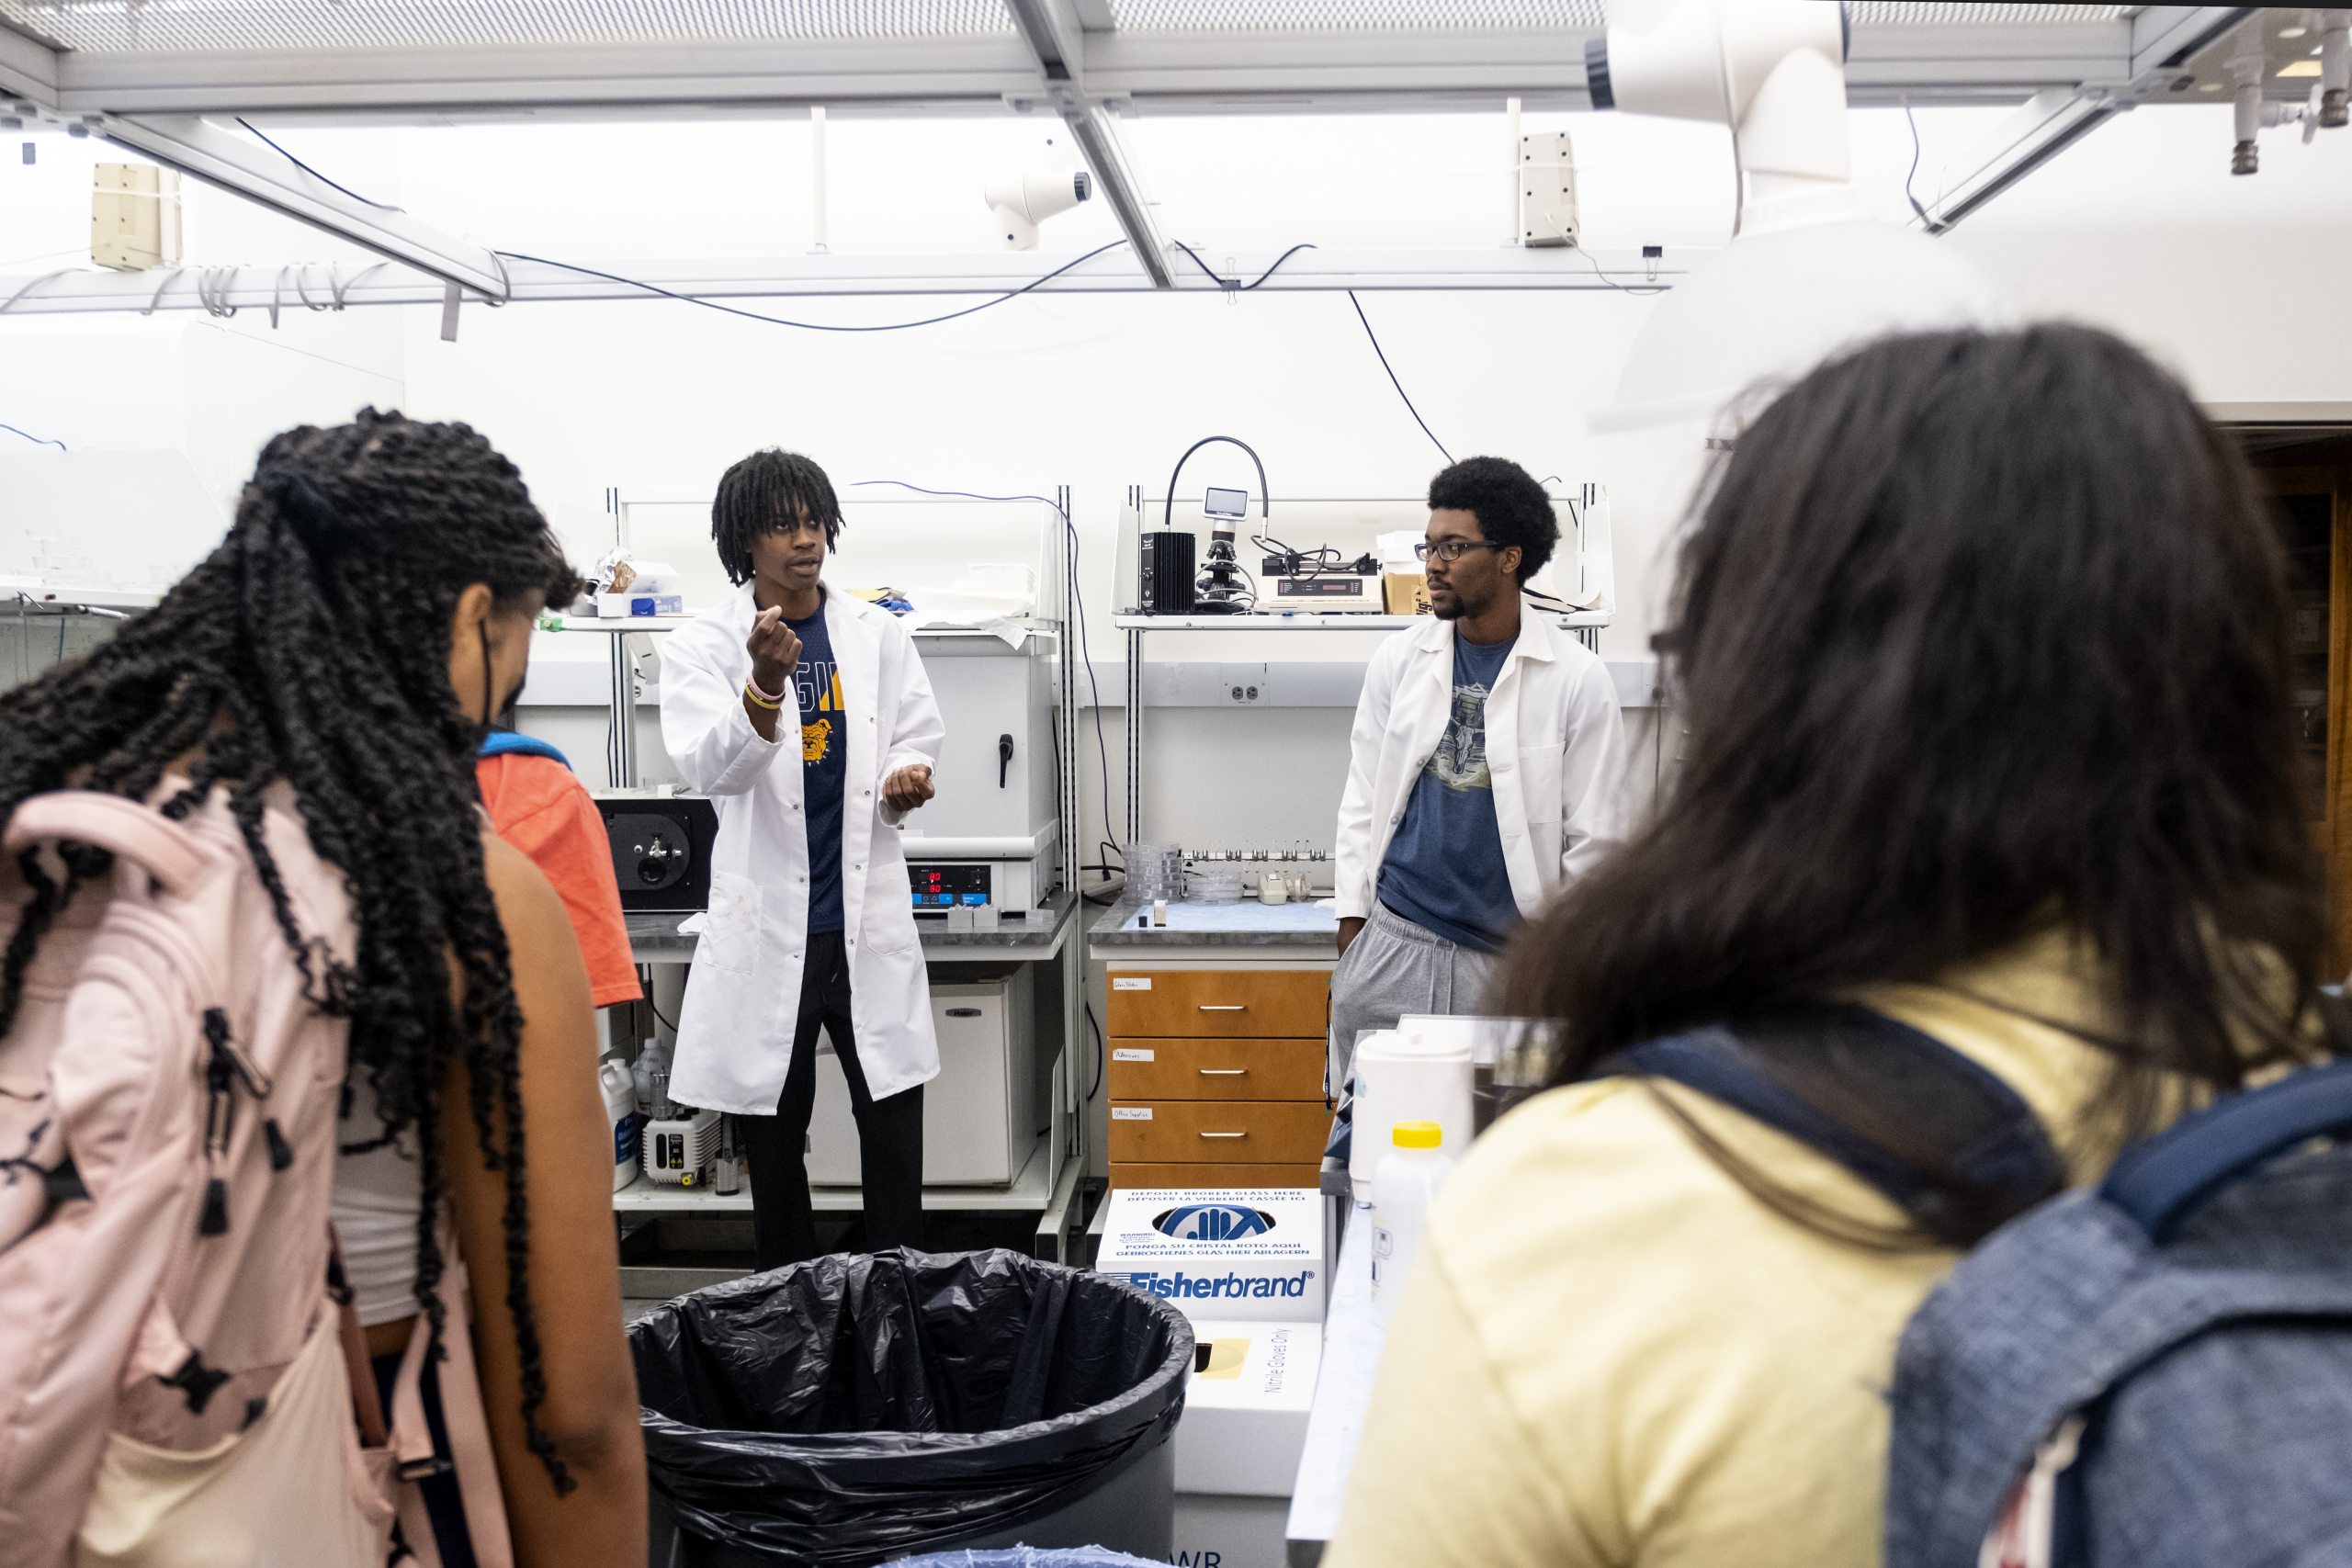 Two Black student researchers in white lab coats explain their research to rising senior high school students.